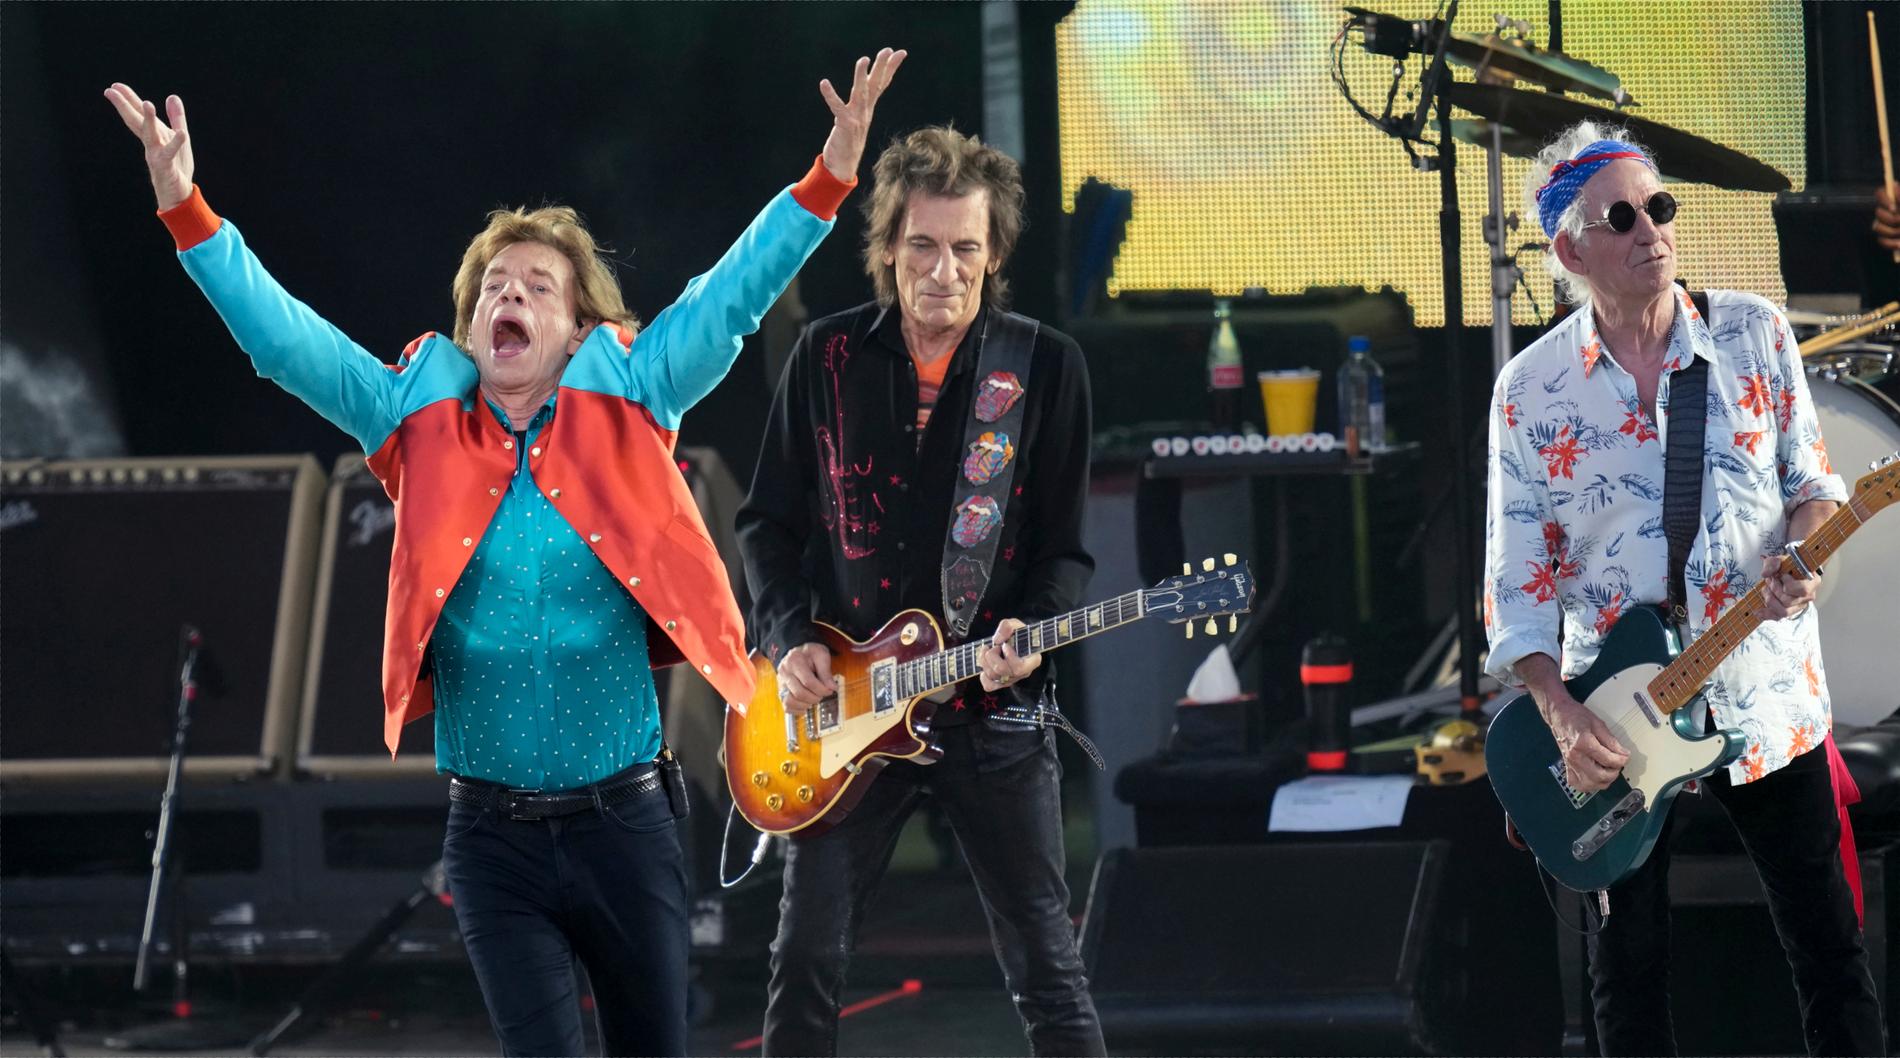 The Rolling Stones with their long-awaited new album